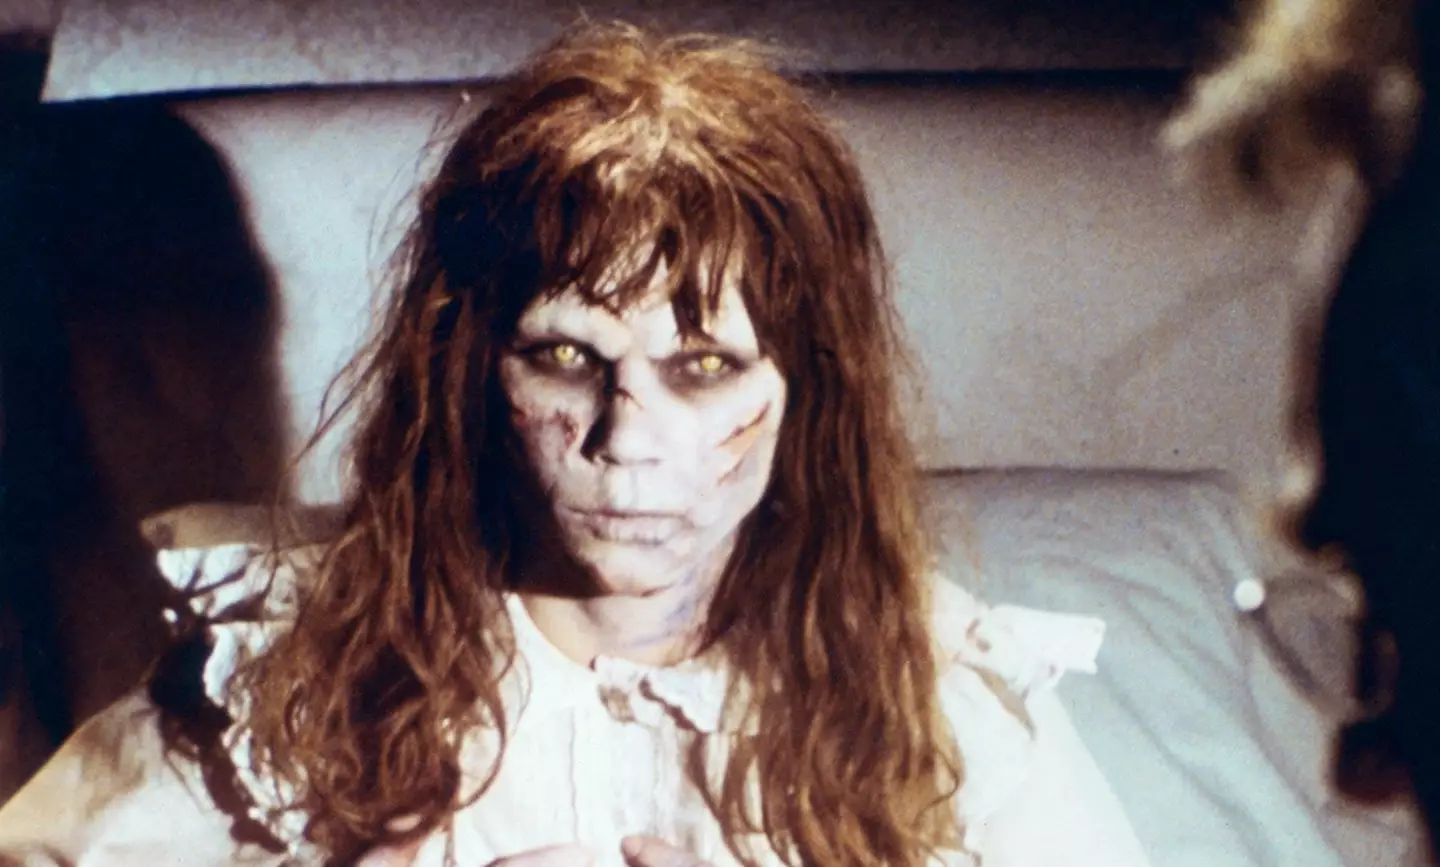 Linda Blair put on a terrifying performance in The Exorcist.